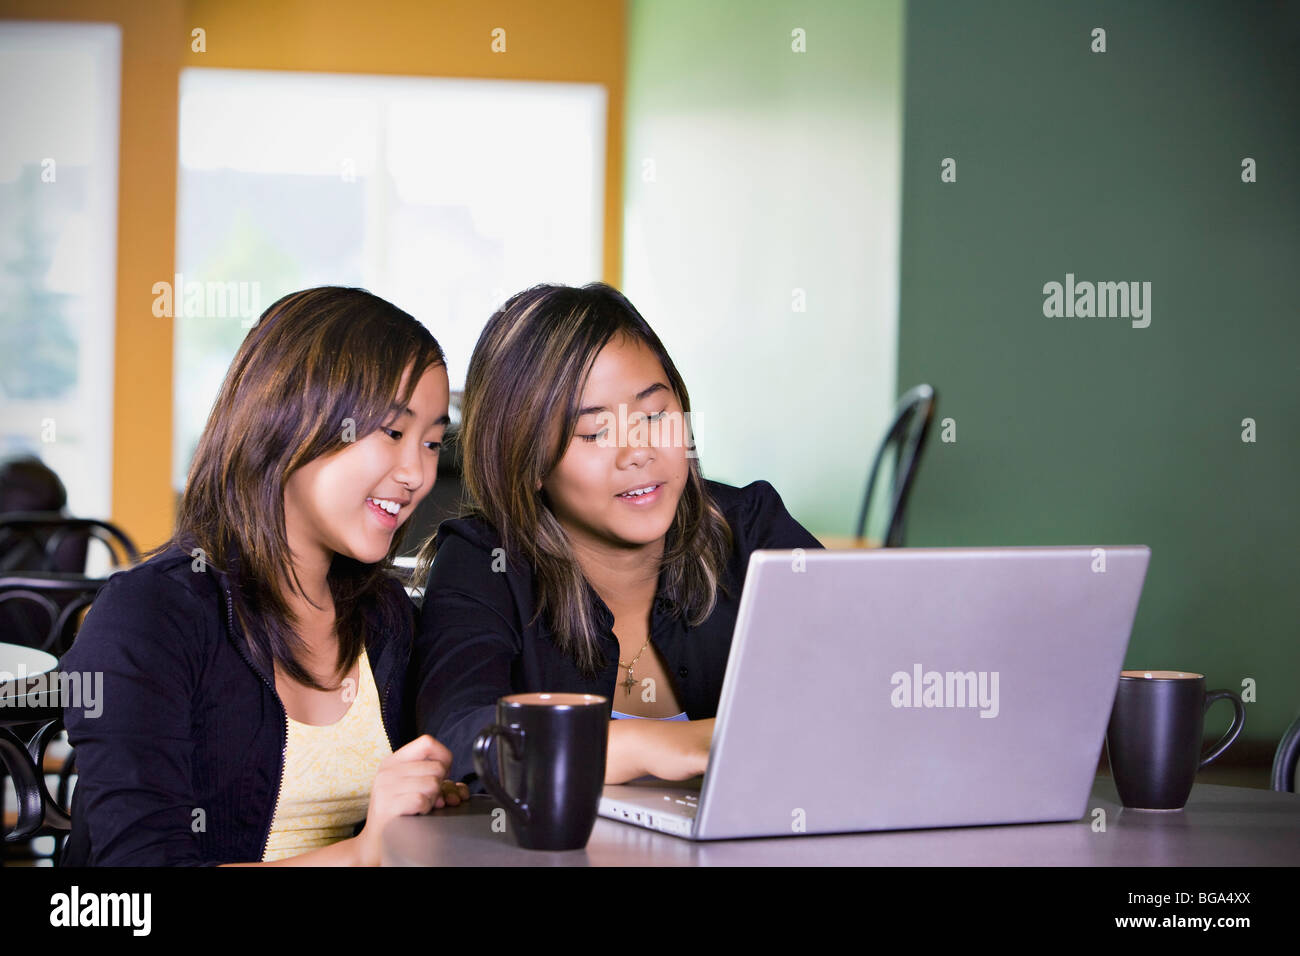 Two girls on a laptop computer Stock Photo